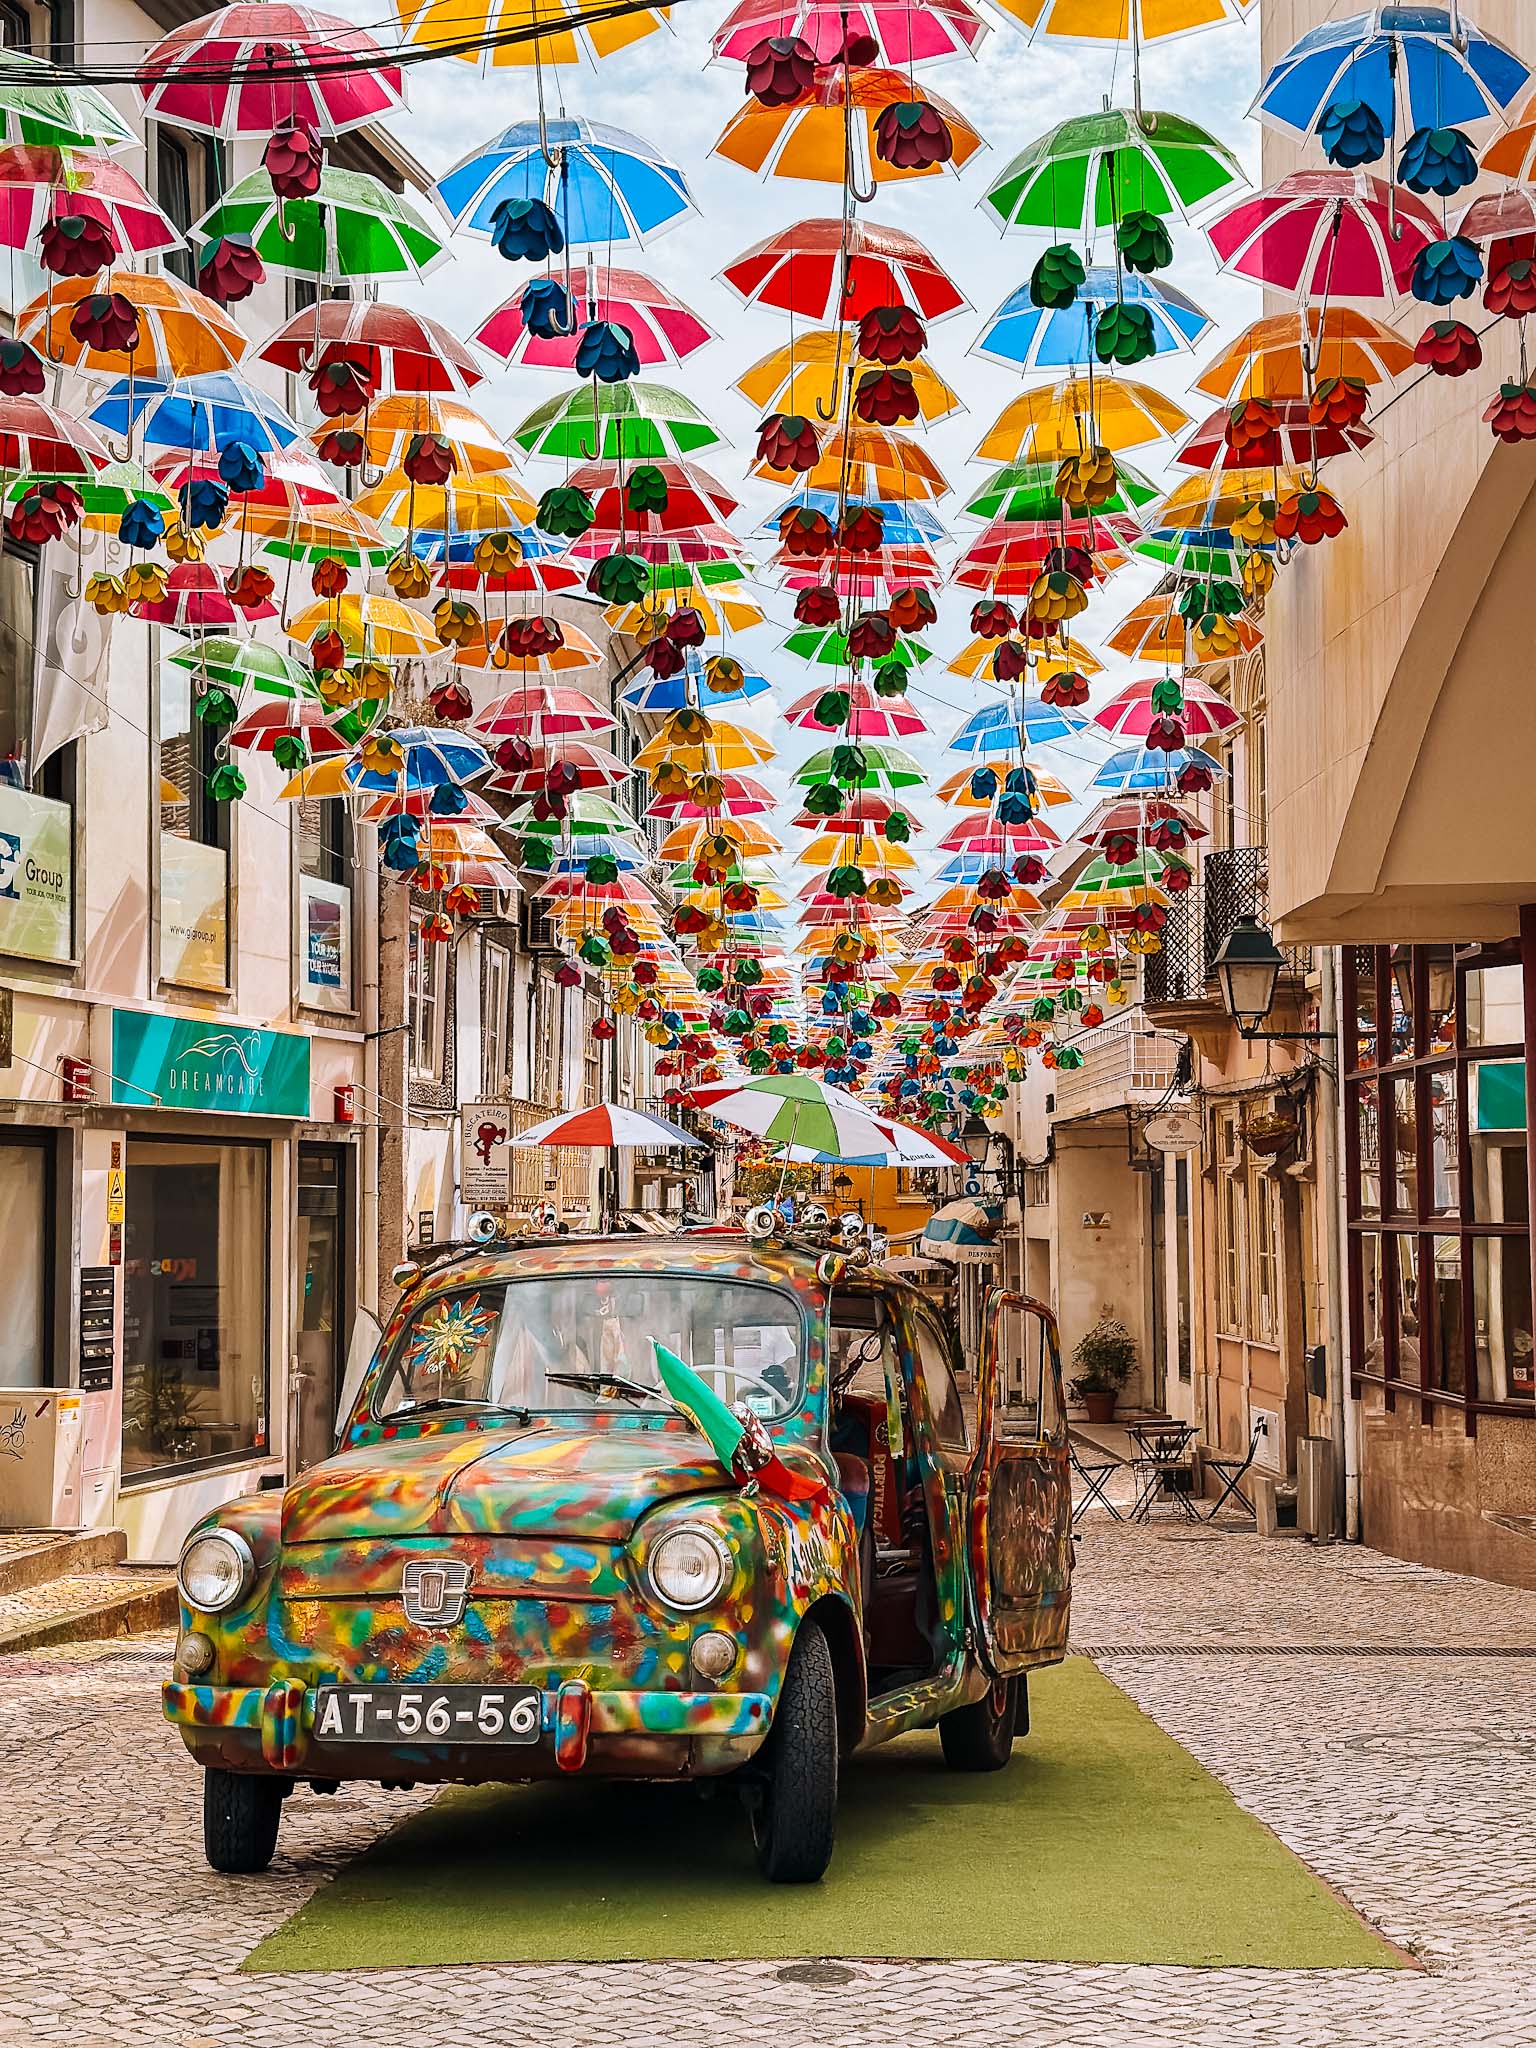 Best things to do near Aveiro, Portugal - Agueda, the City of Umbrellas